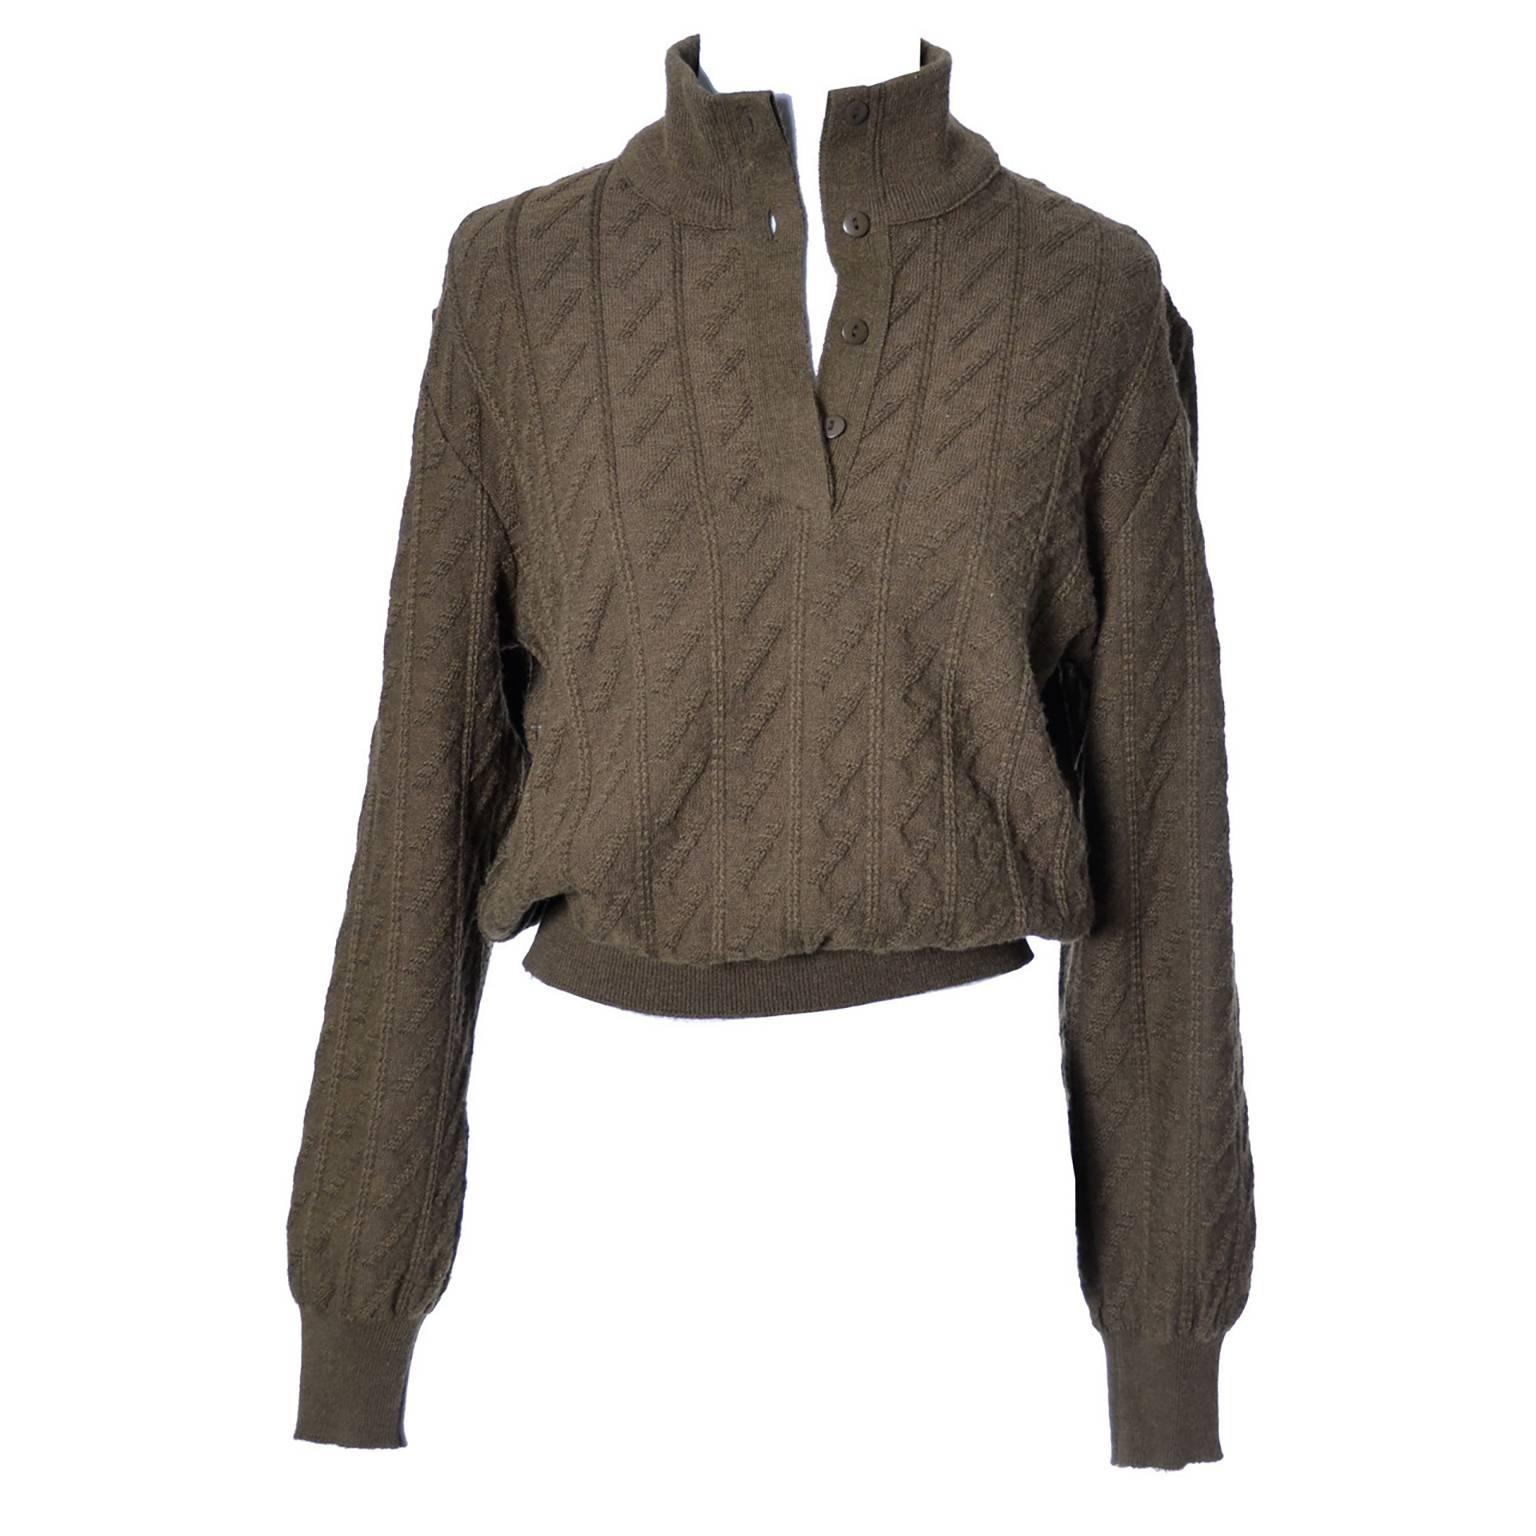 This is a late 1970's or early 1980's Courreges vintage brown cable knit sweater in a camel hair, wool, acrylic knit blend. A really nice, pretty soft brown Fall sweater with buttons at the neckline in excellent condition. When laid flat, this